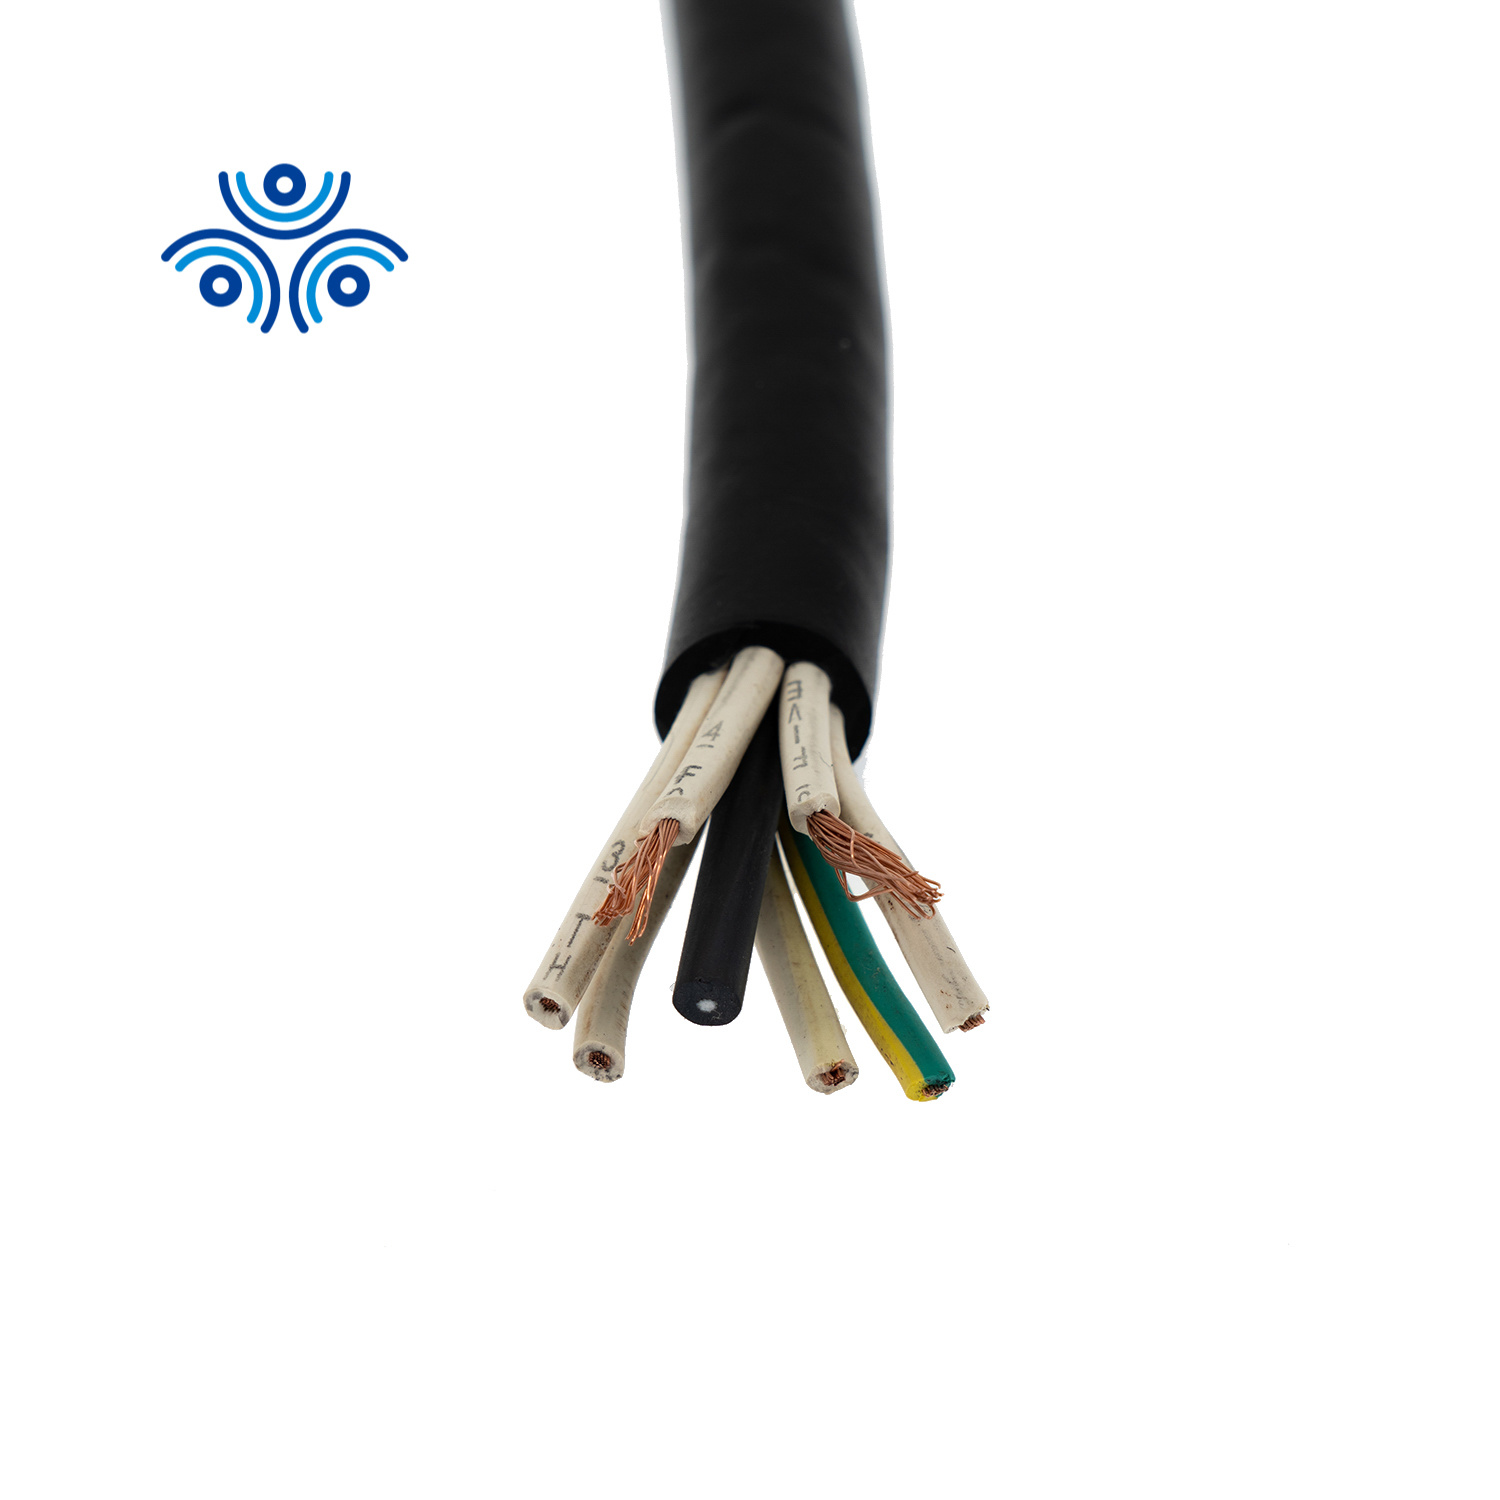 China 
                UL62 16/2 16/3 16/4 Soow Sjoow Rubber Portable Cord Cable at Good Price
              manufacture and supplier